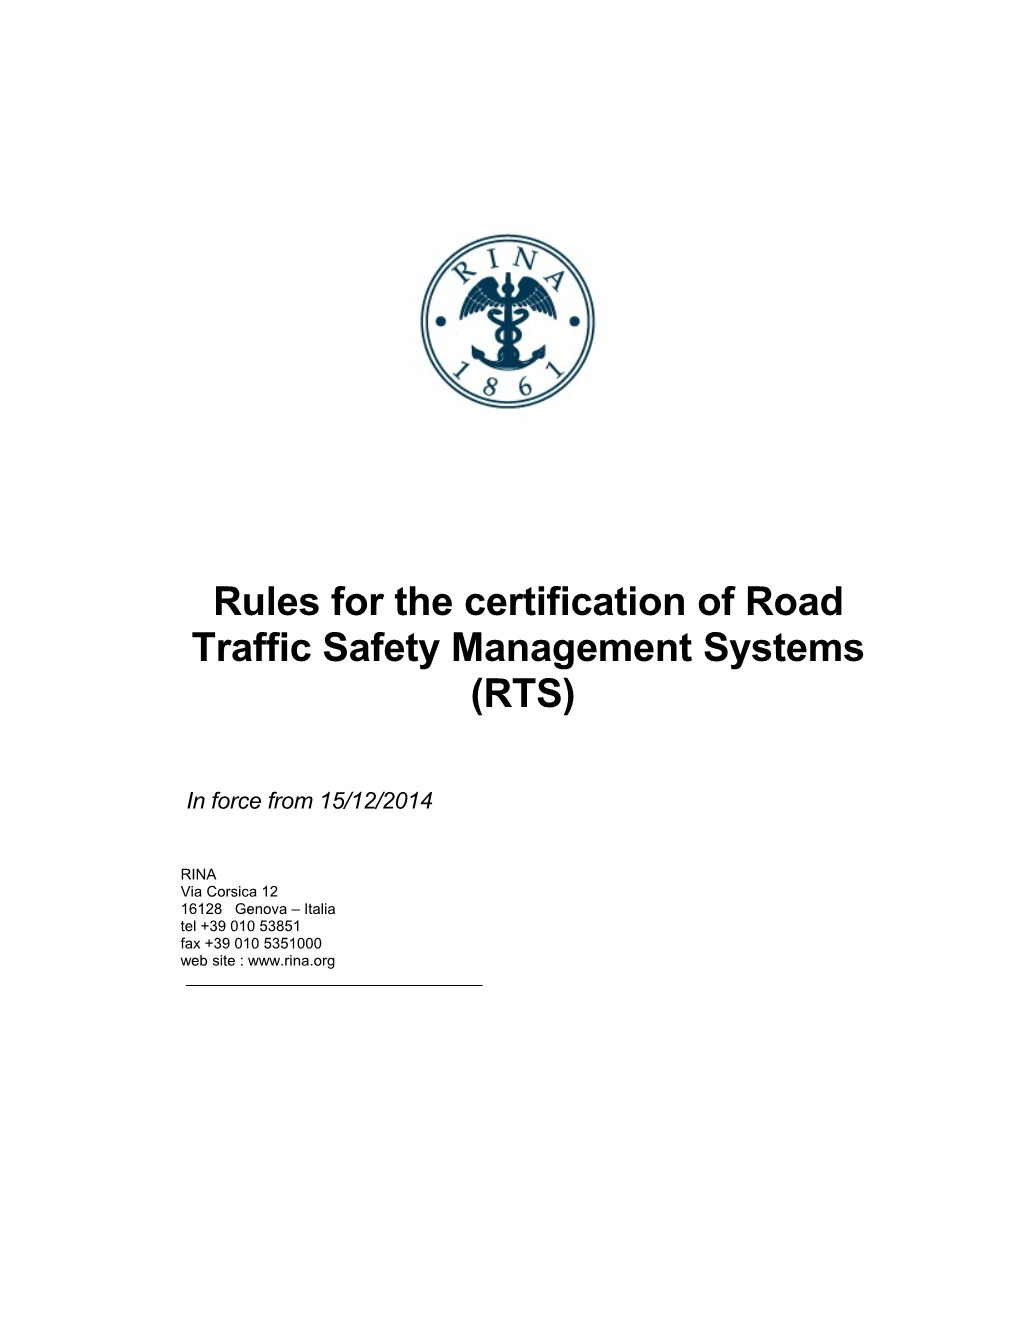 Rules for the Certification of Road Traffic Safety Management Systems (RTS)